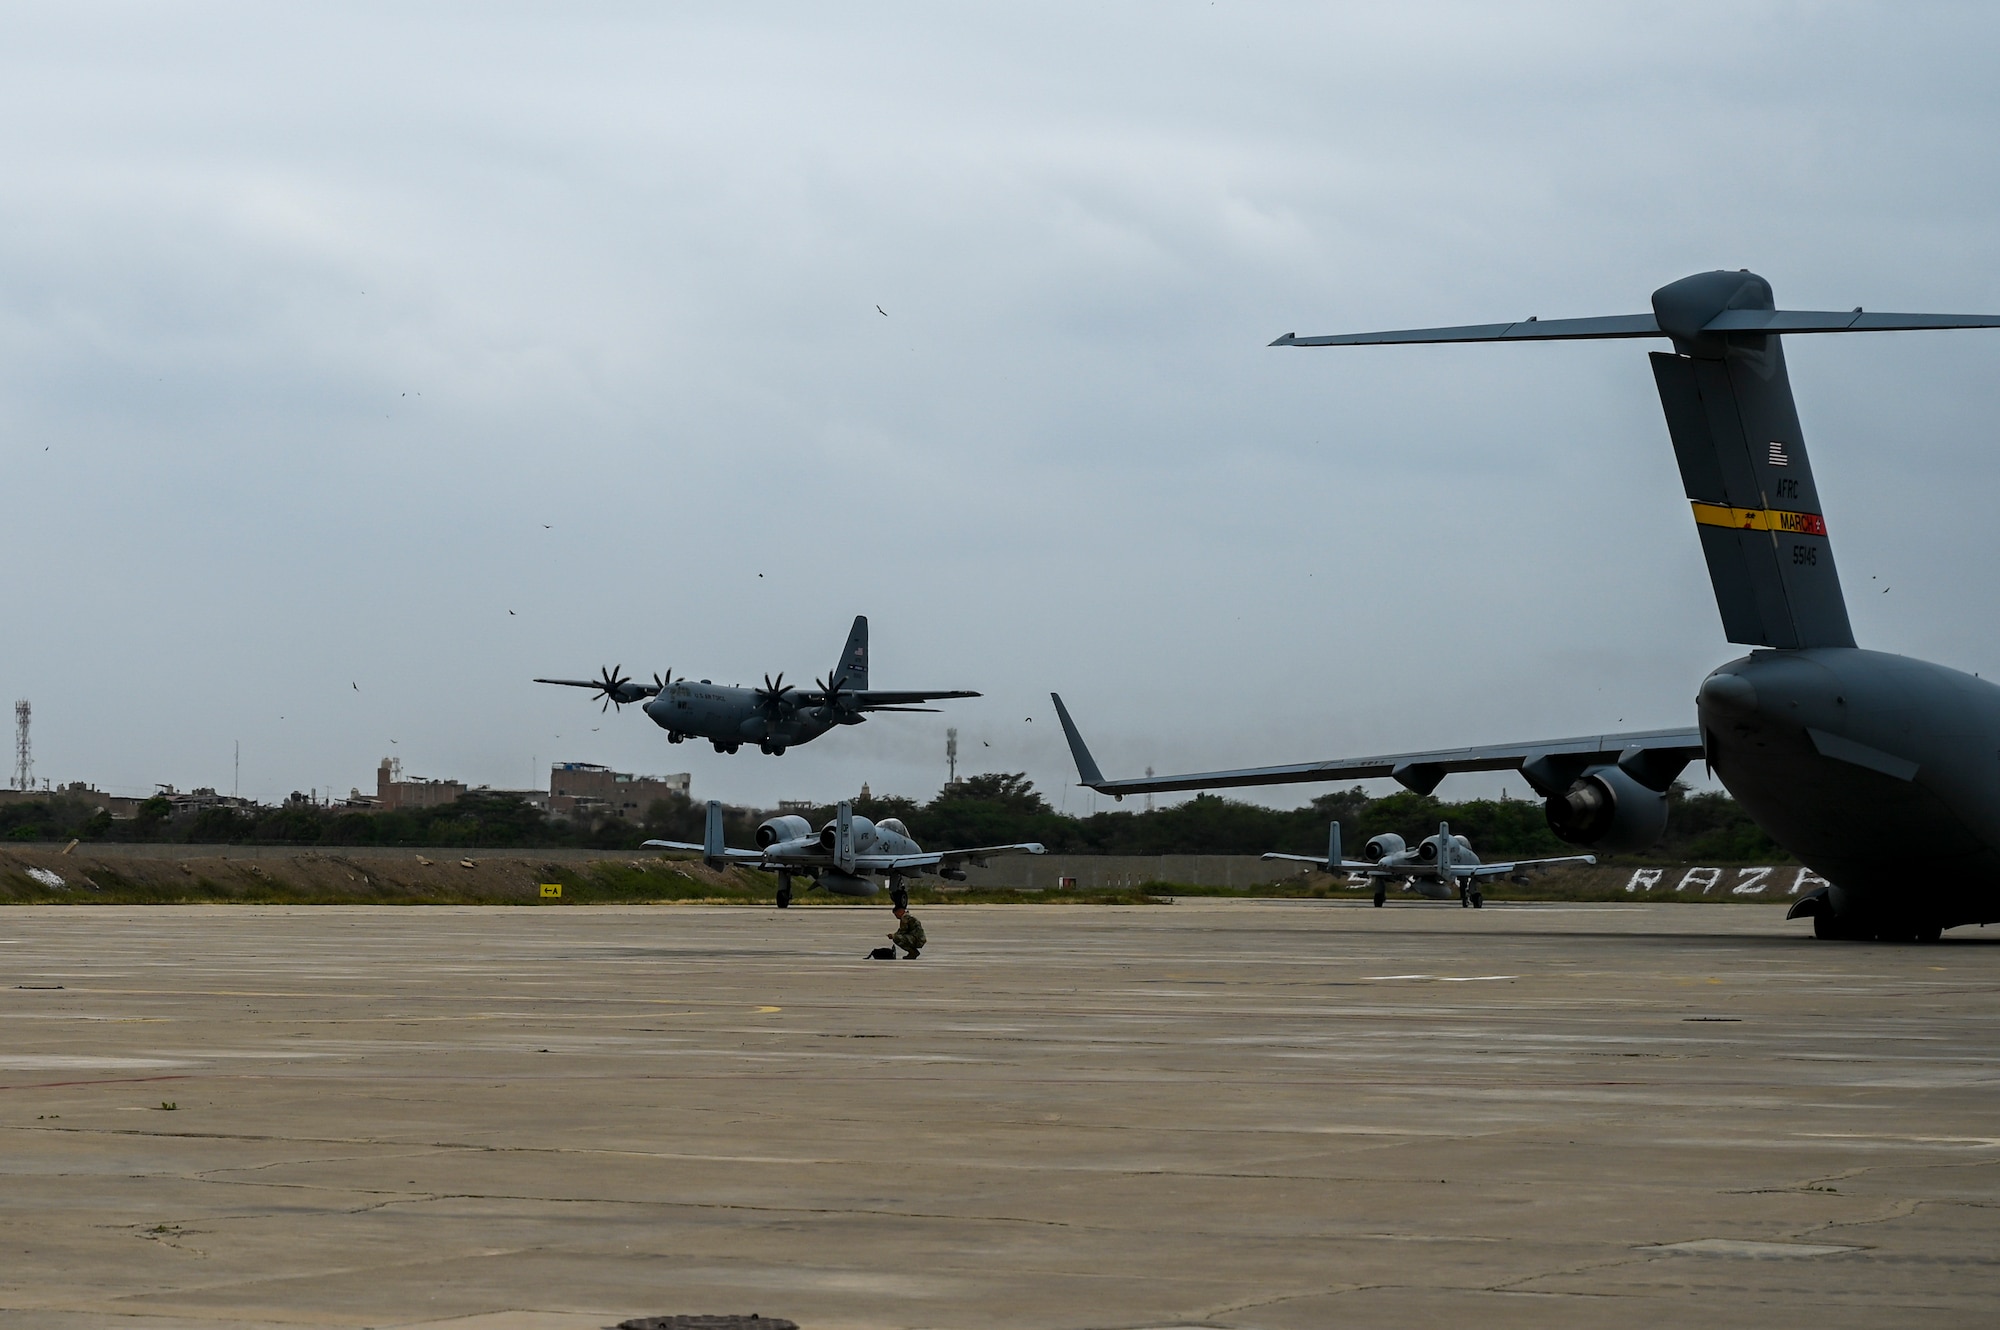 A C-130 lands on a runway behind two A-10s waiting to taxi out and a C-17 sitting on the flight line.